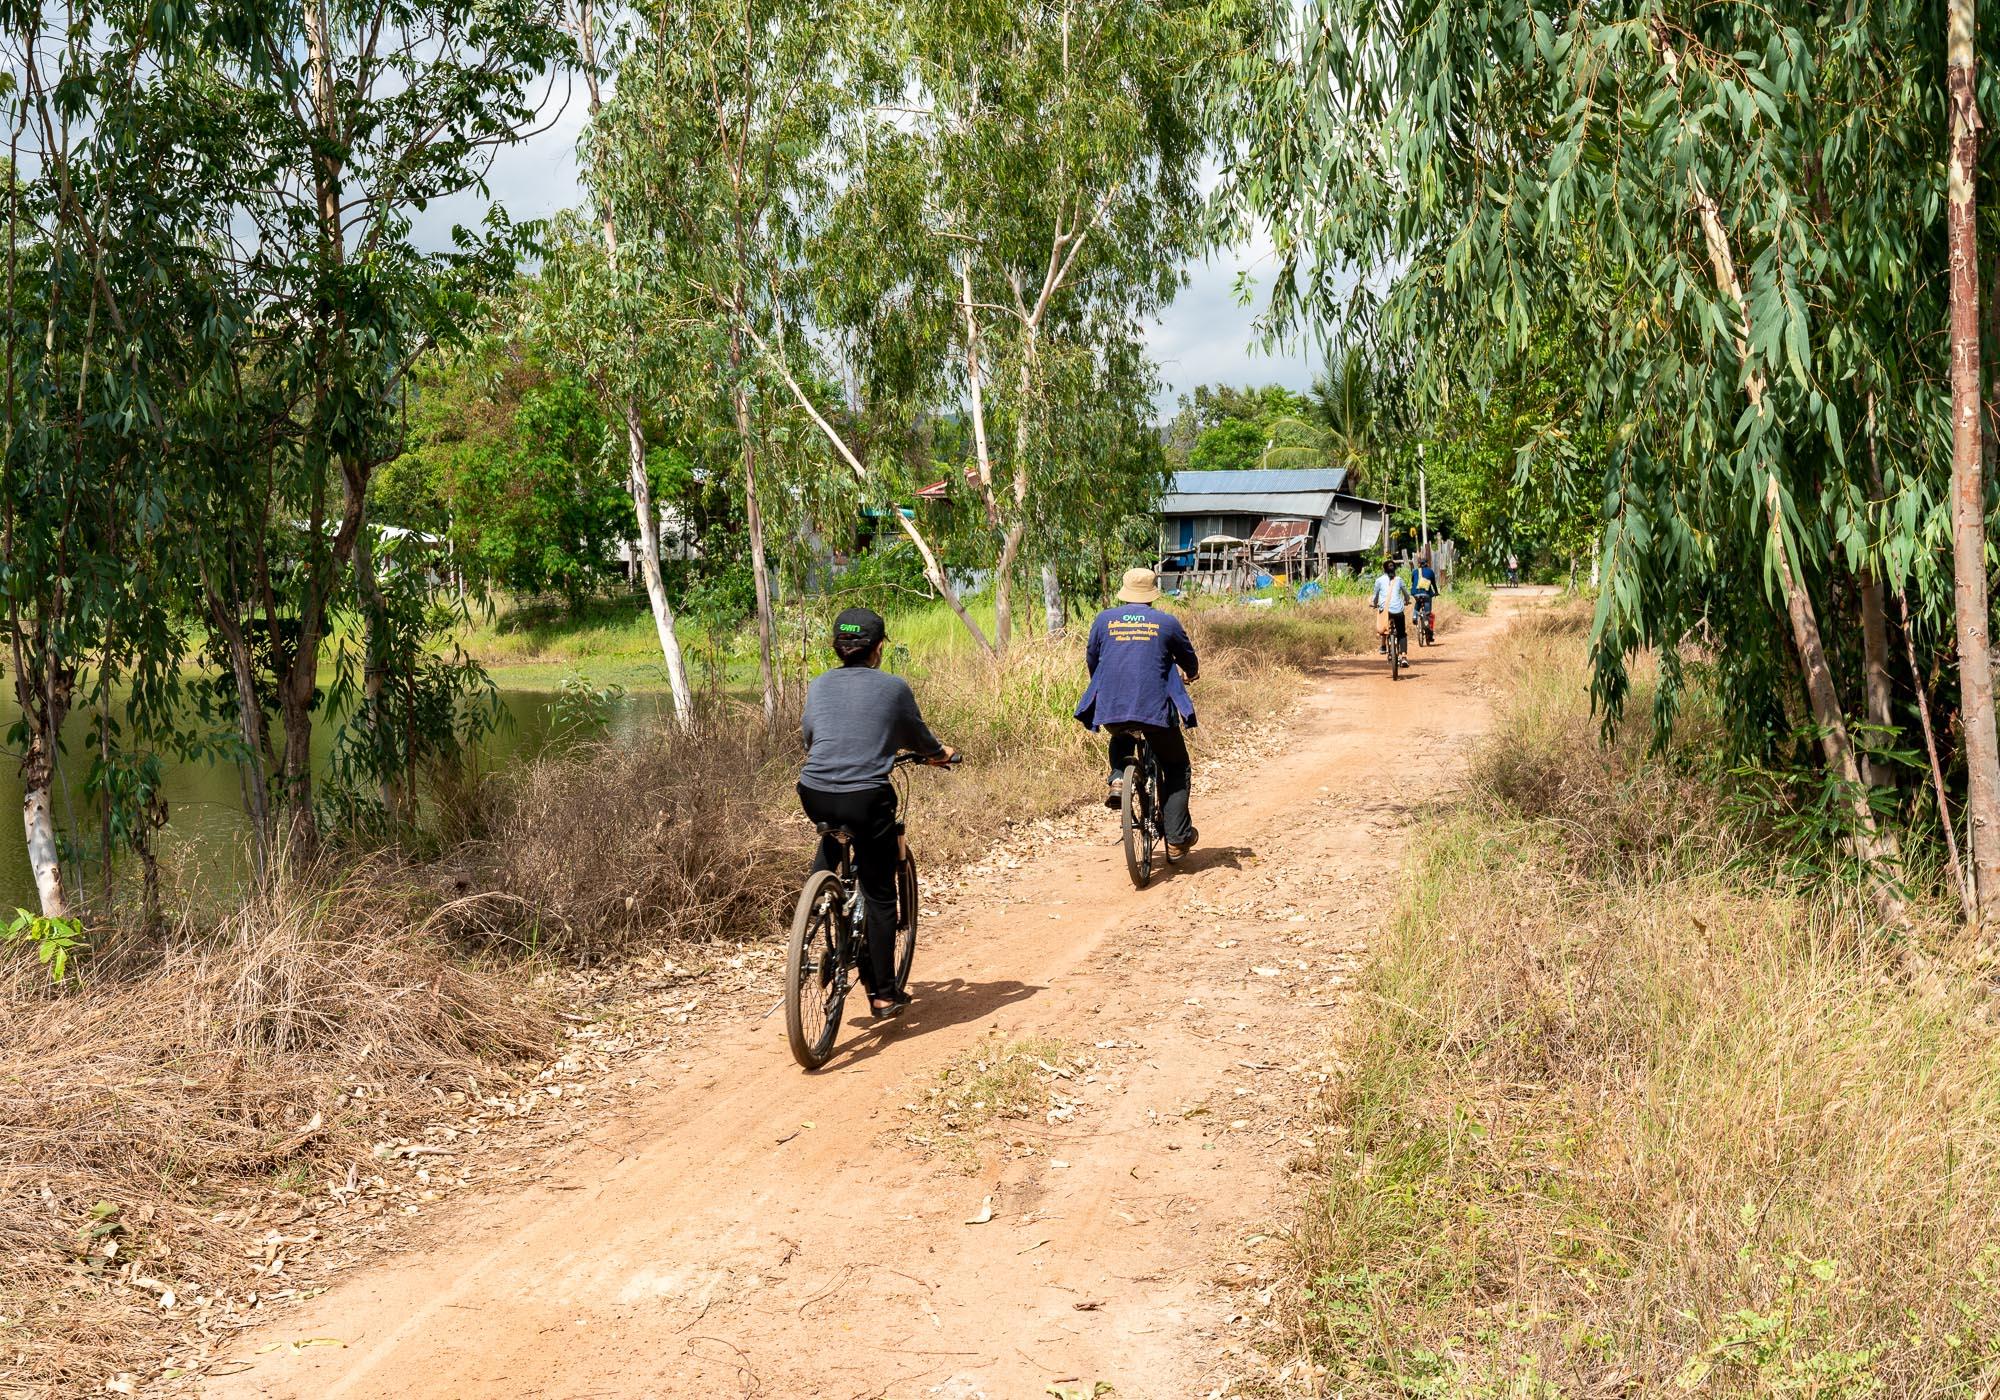 With a bike, visitors are able to take the smaller dirt trails that lead through local communities in the North Zone. – © Michael Turtle